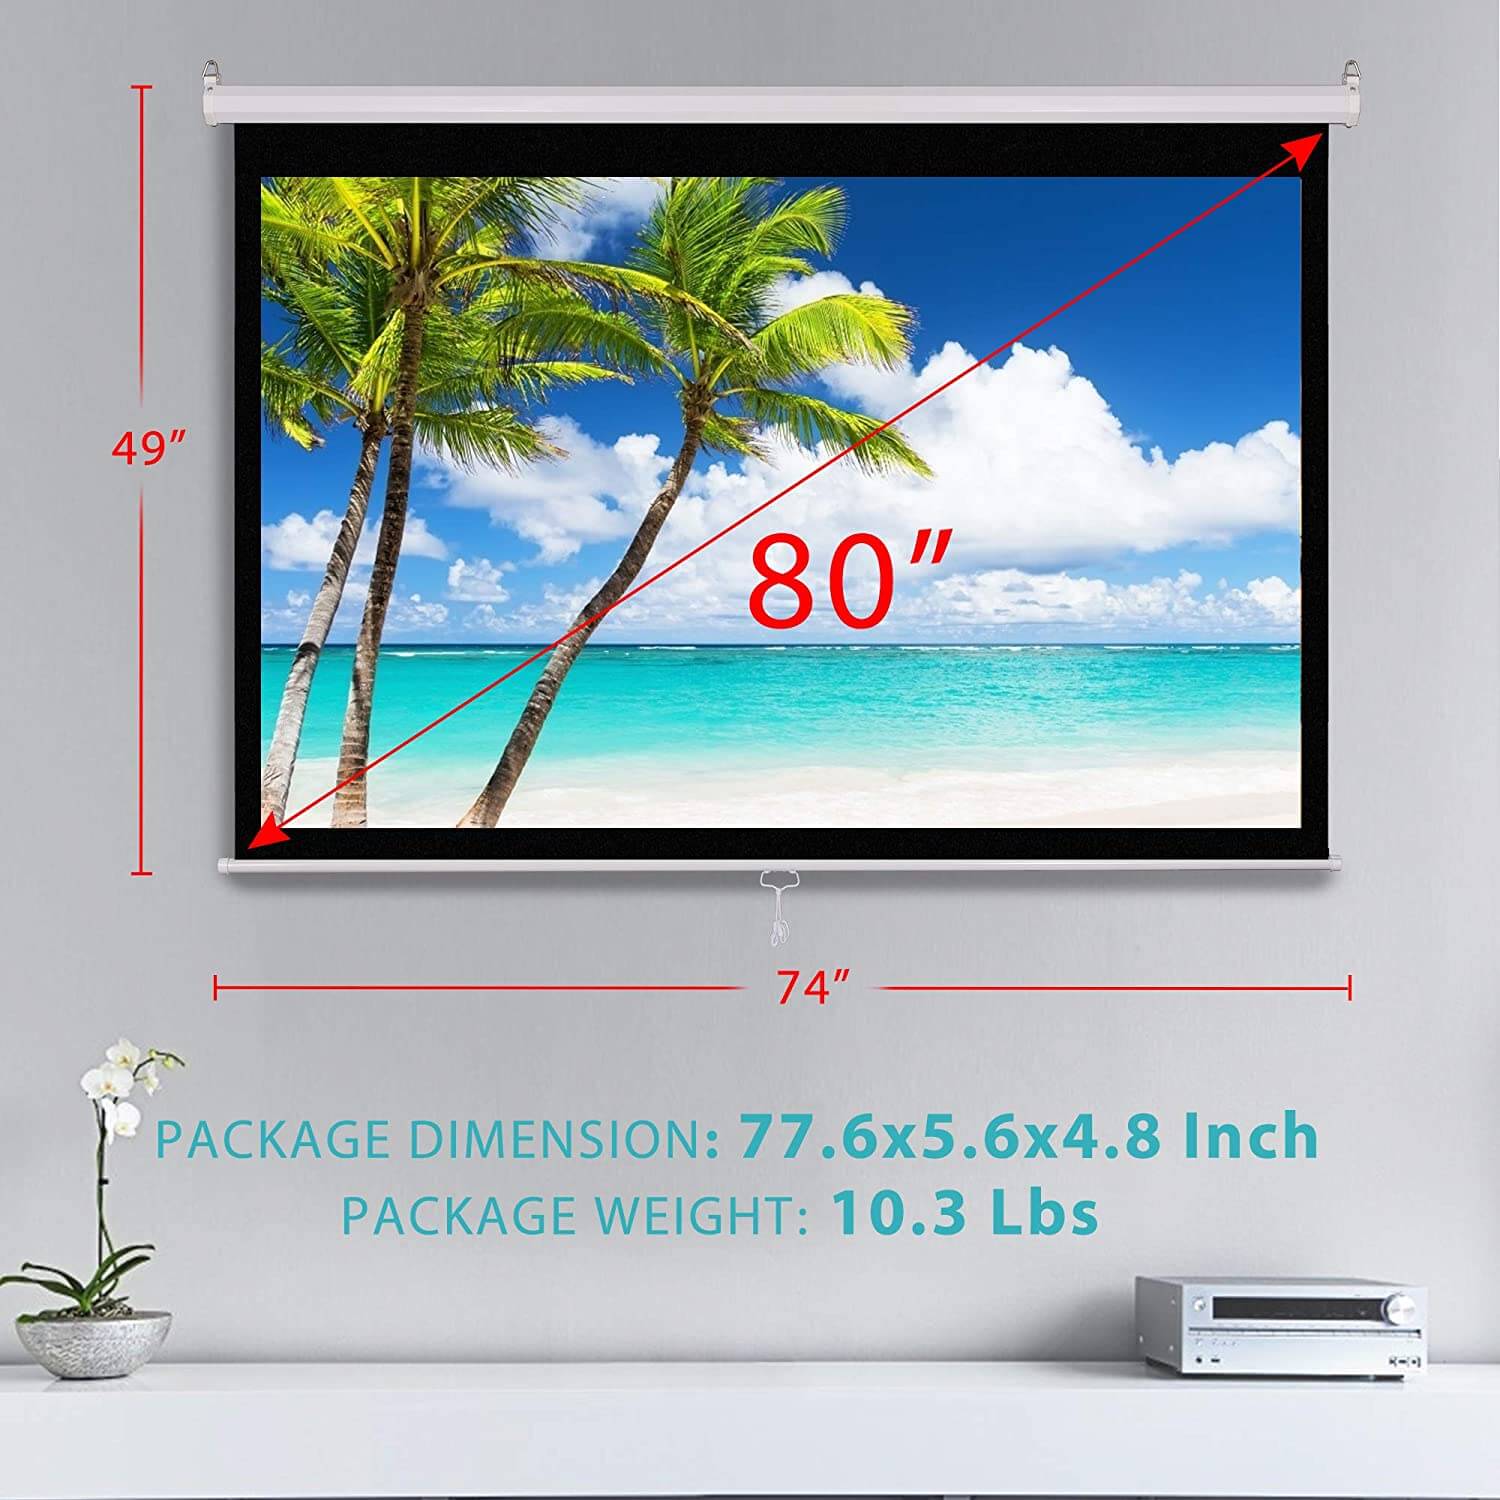 VIVOHOME 80 Inch Manual Pull Down Projector Screen, 16:9 HD Retractable Widescreen Matte for Movie Home Theater Cinema Office Video Game